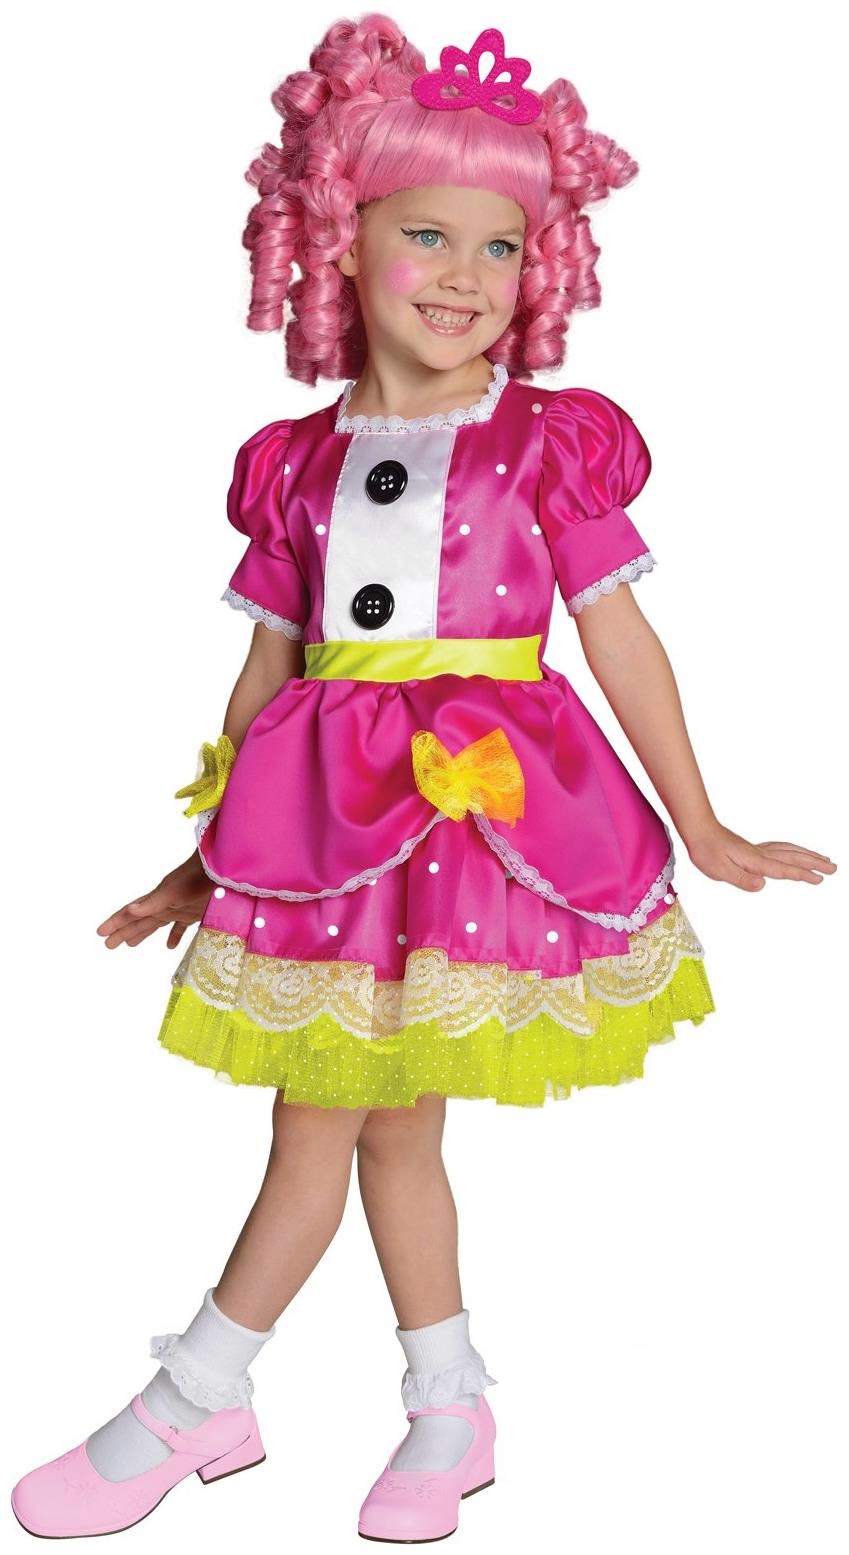  Lalaloopsy Deluxe Jewel Sparkles Toddler  Child Costume